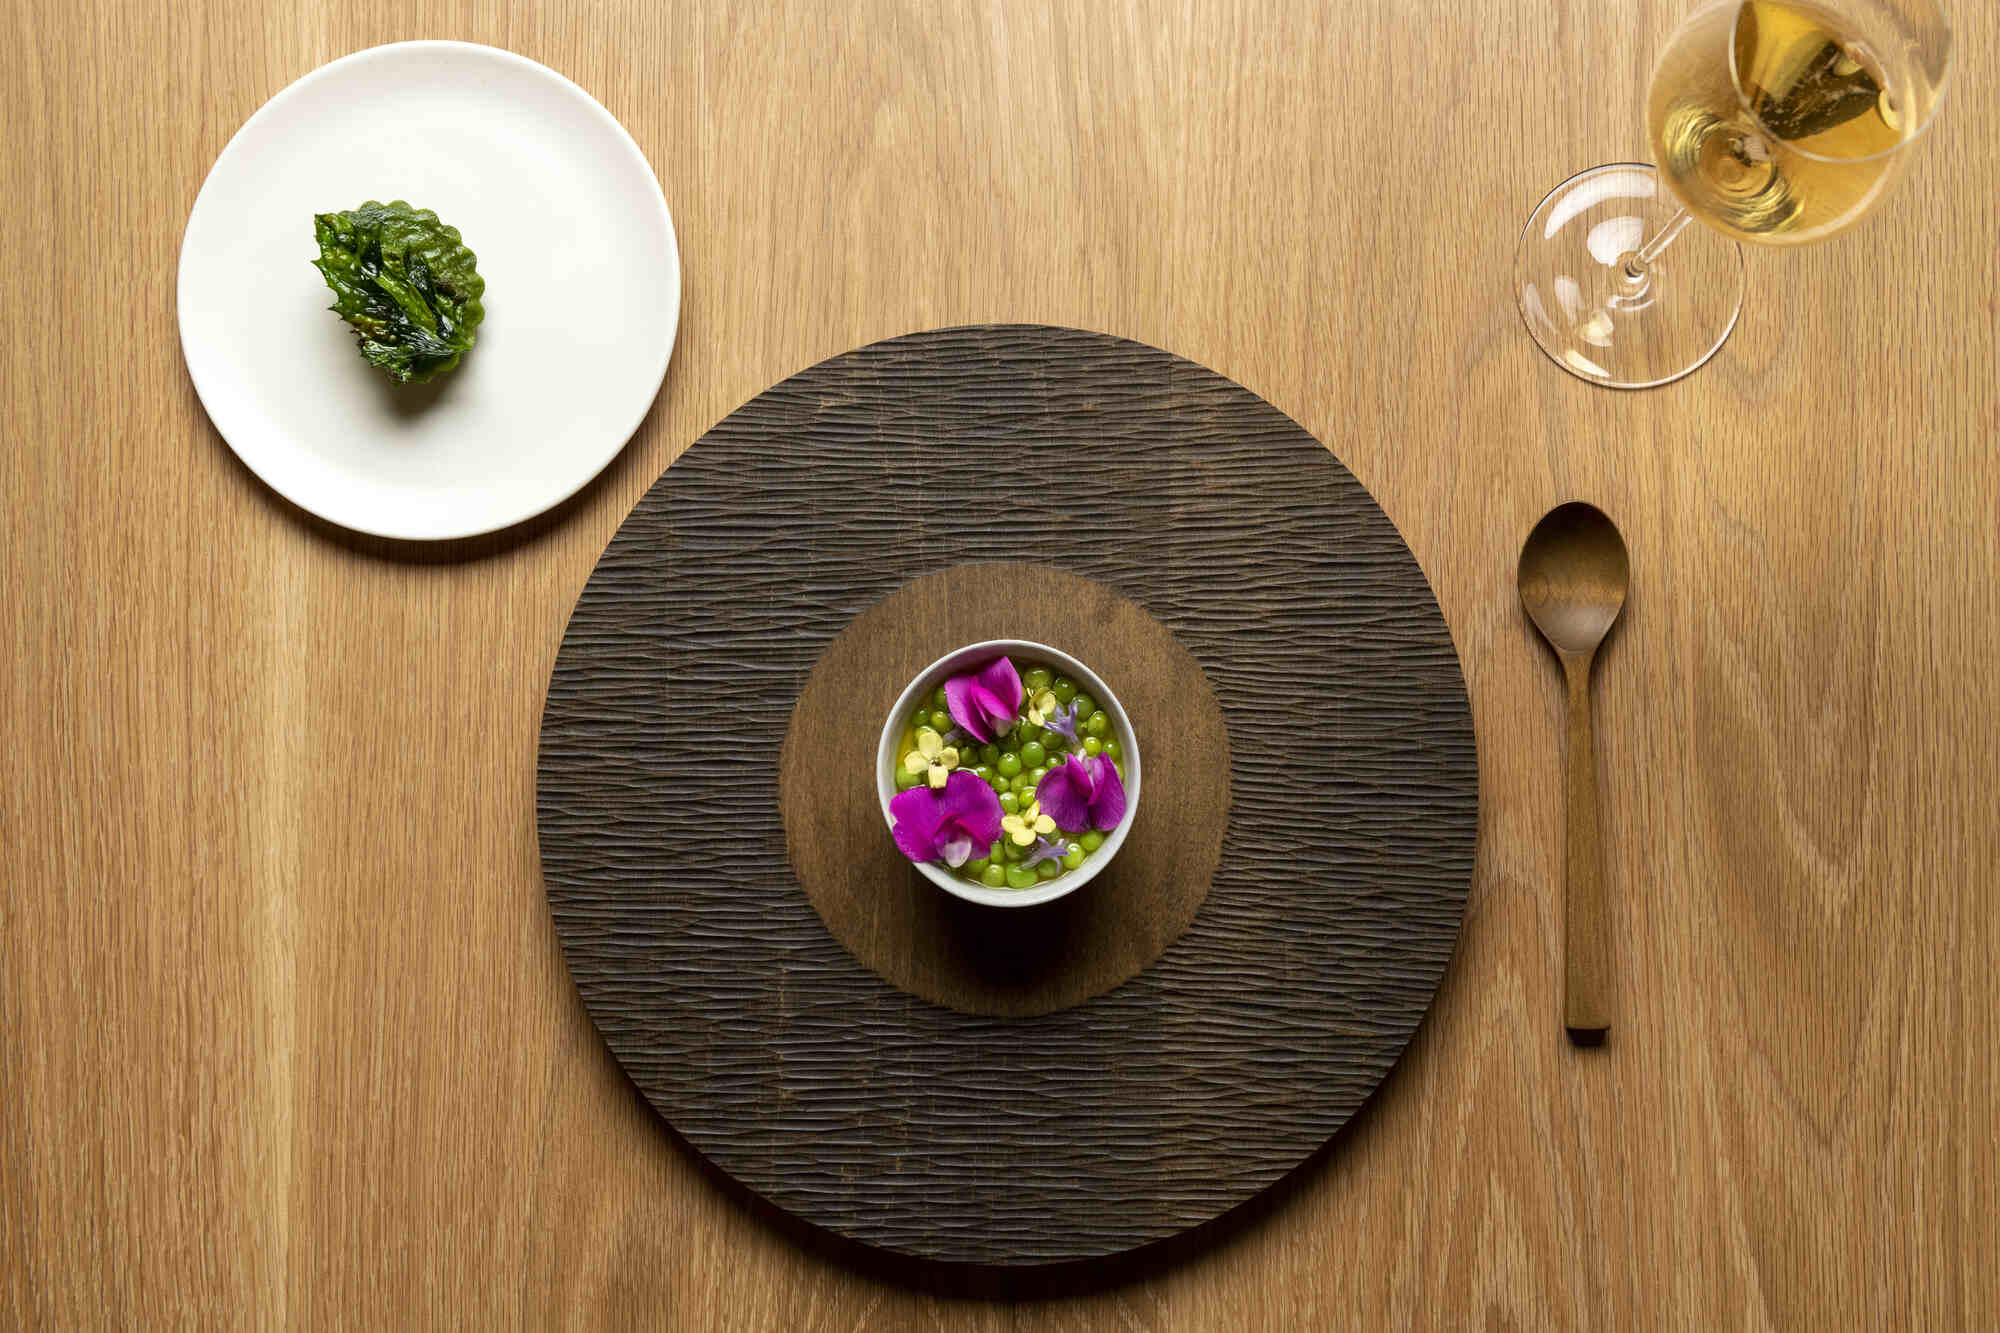 elegantly plated meal on round place setting